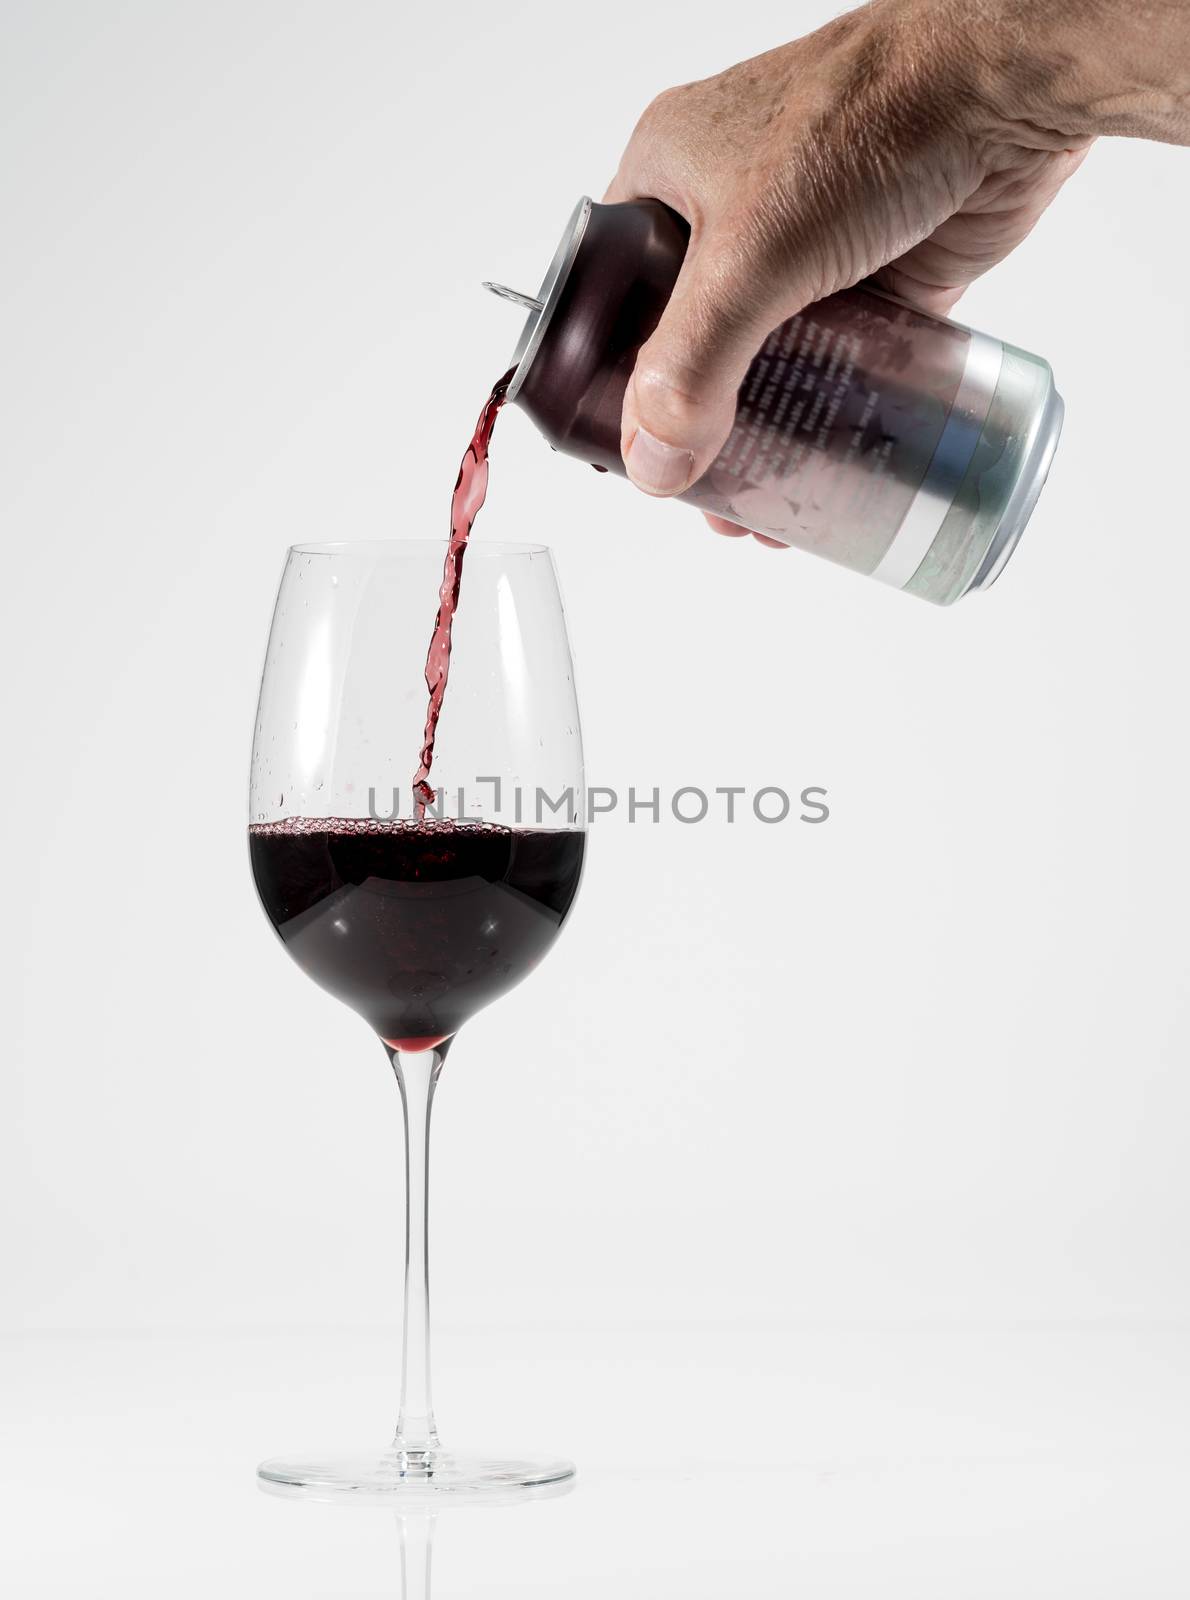 Senior adult pouring a glass of red wine from an aluminum can by steheap